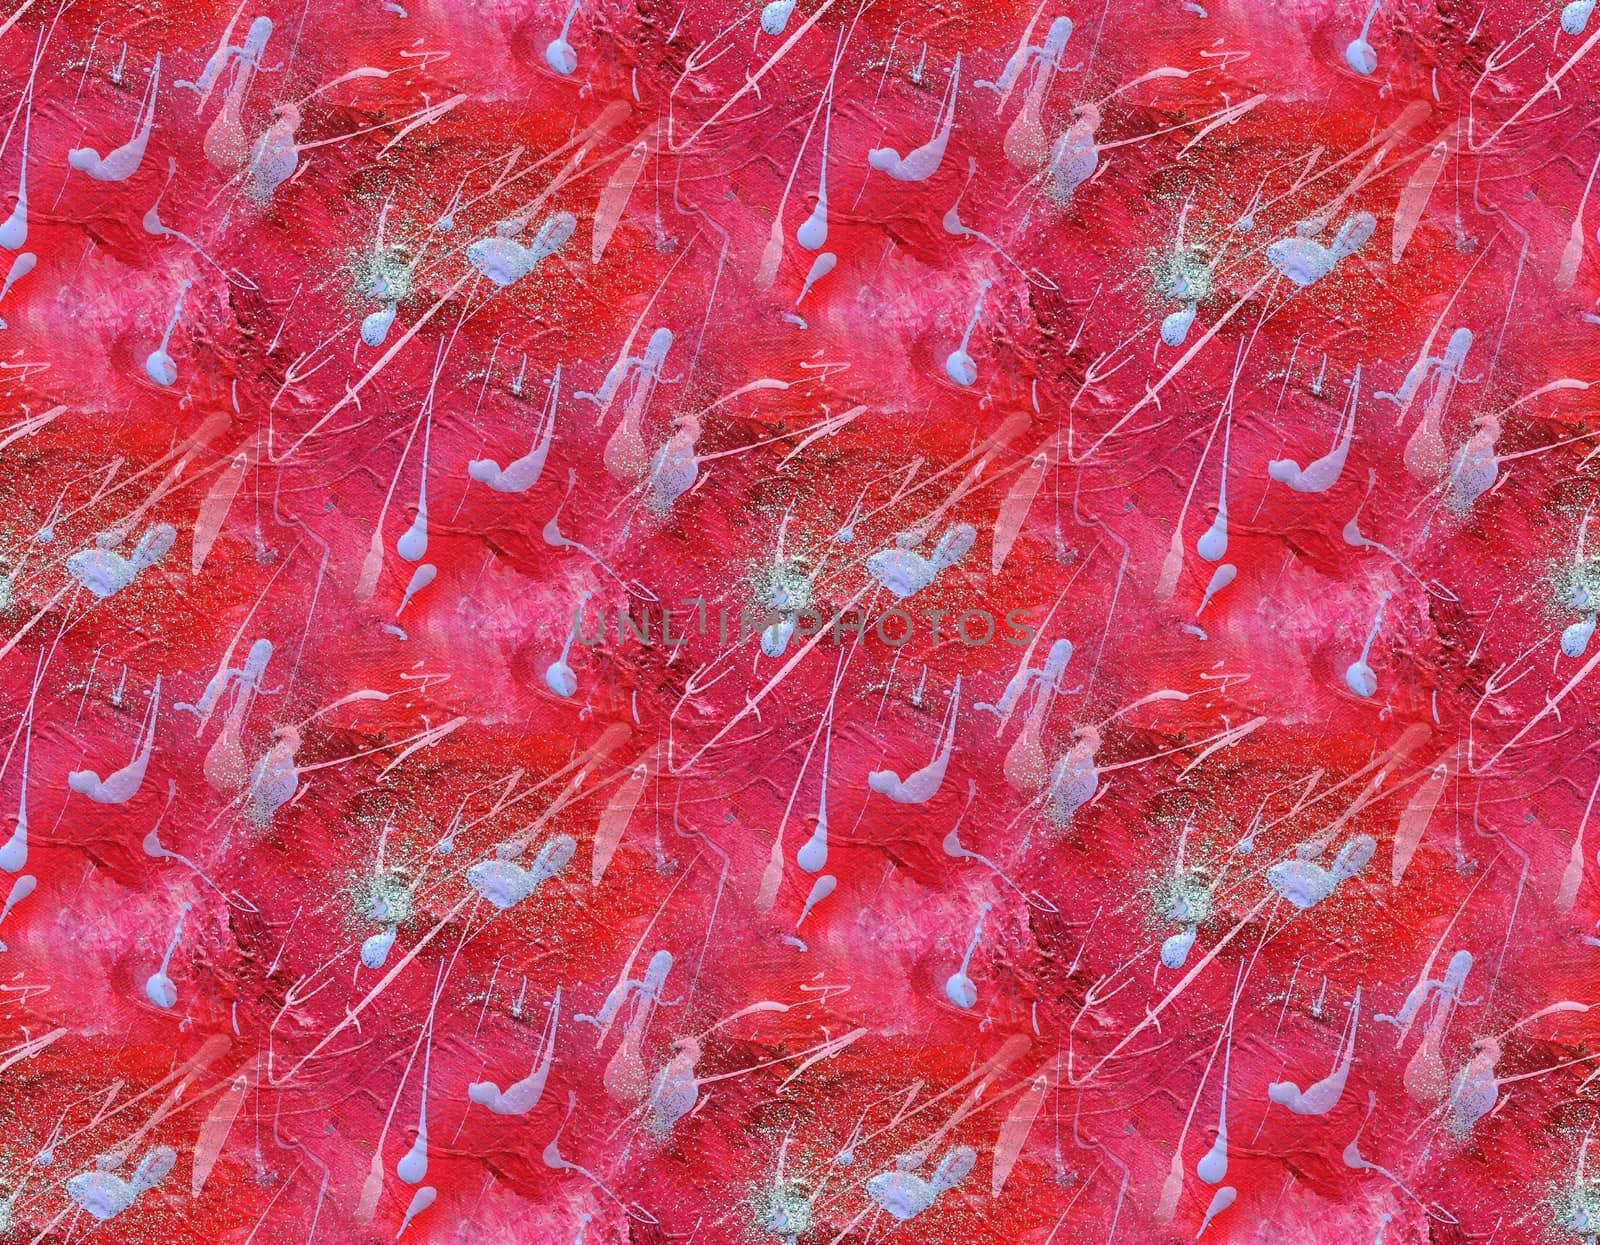 Red Spray pattern as seamless tileable texture